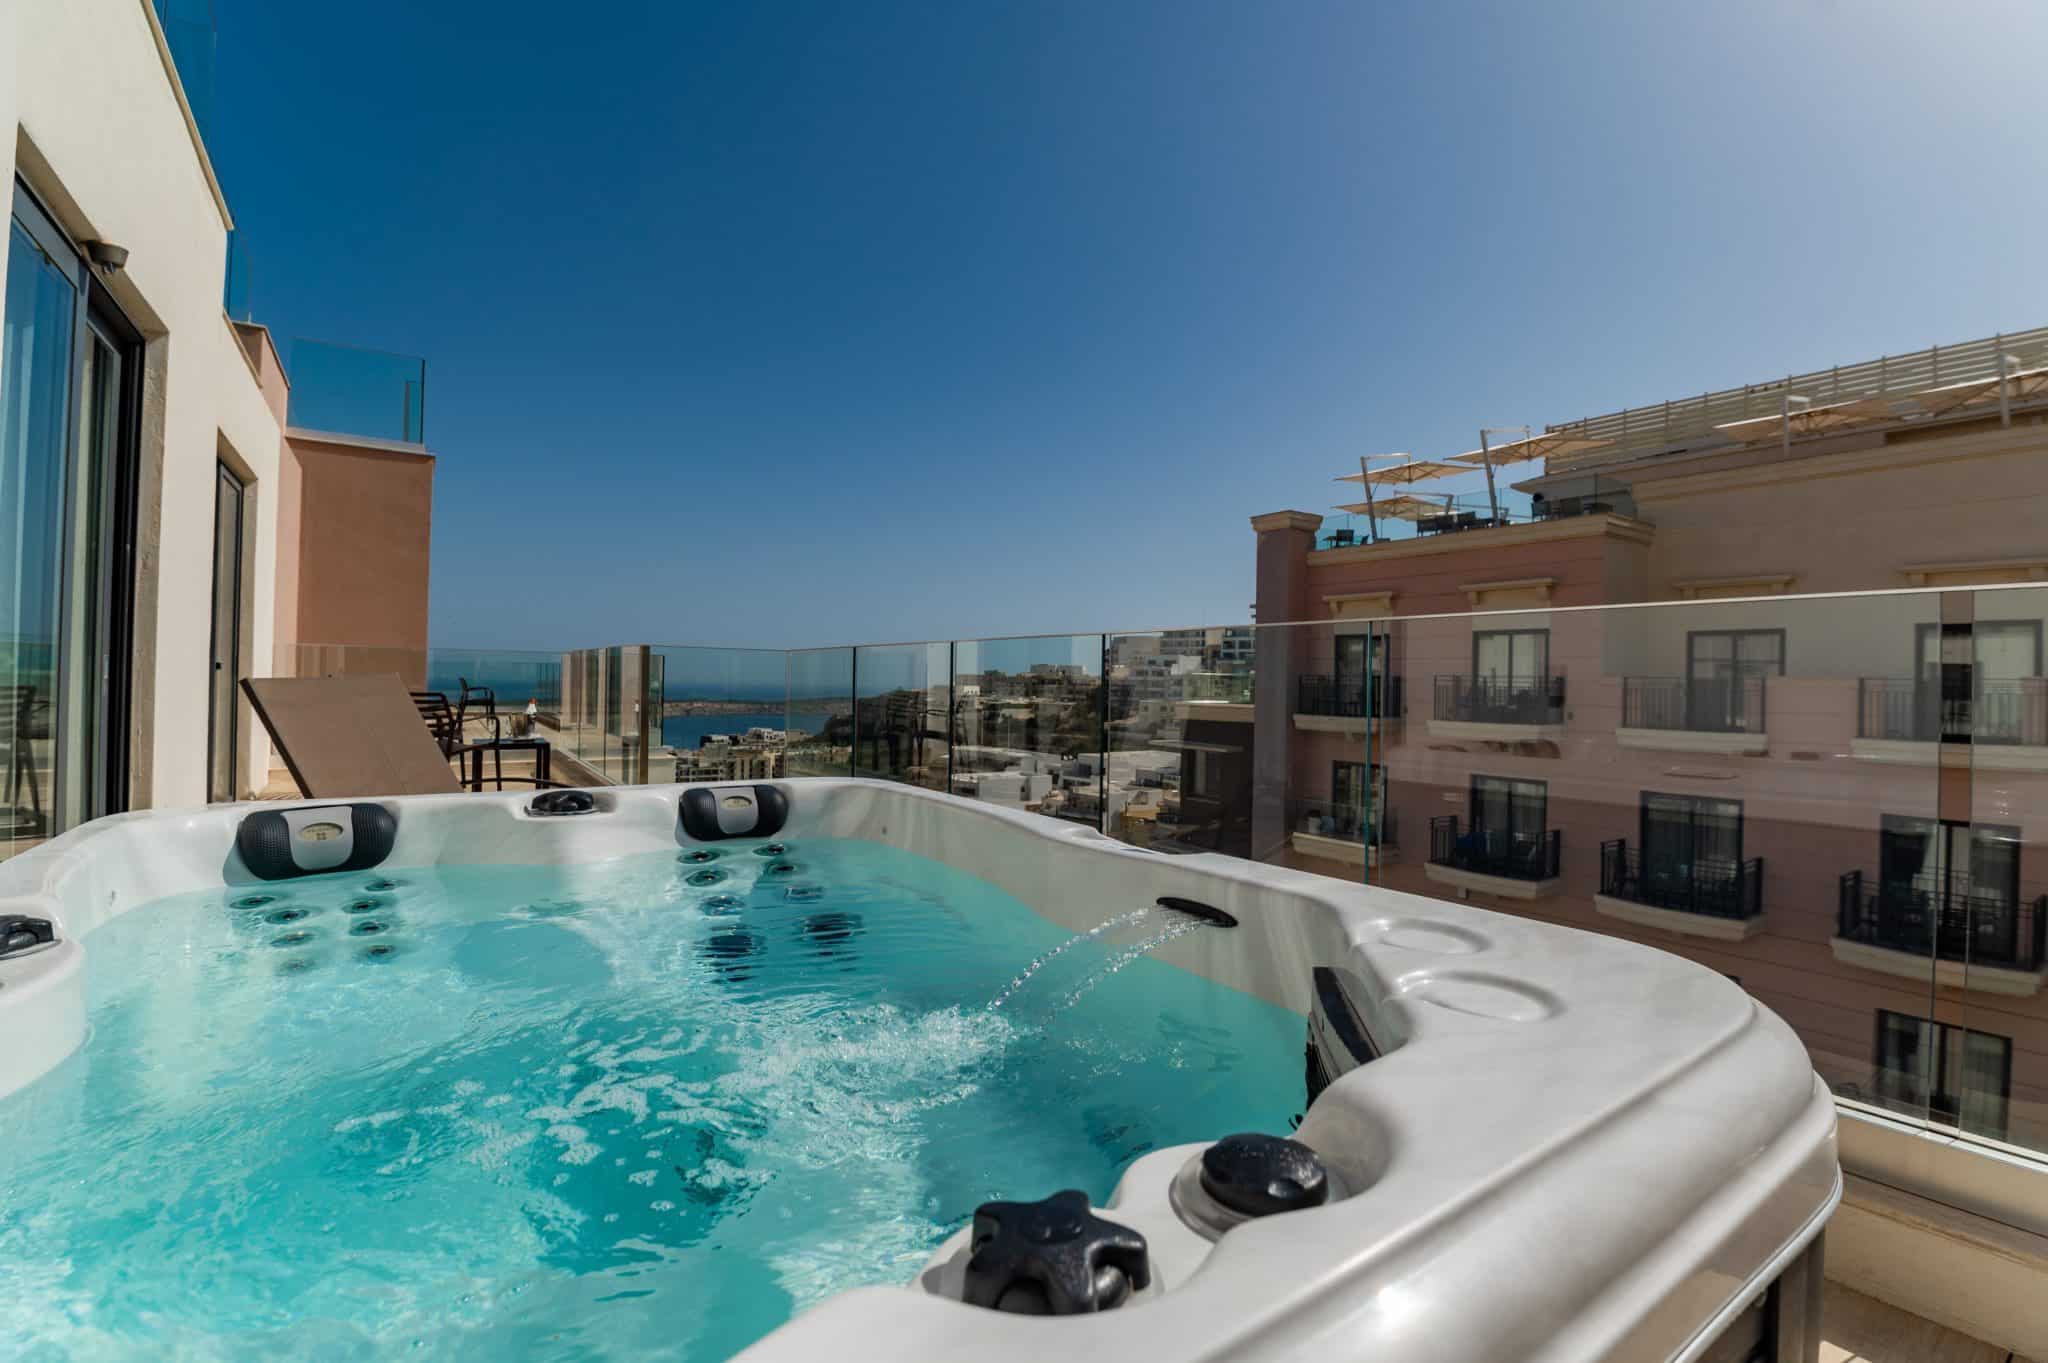 Town view room with jacuzzi overlooking Mellieha, Mellieha Bay